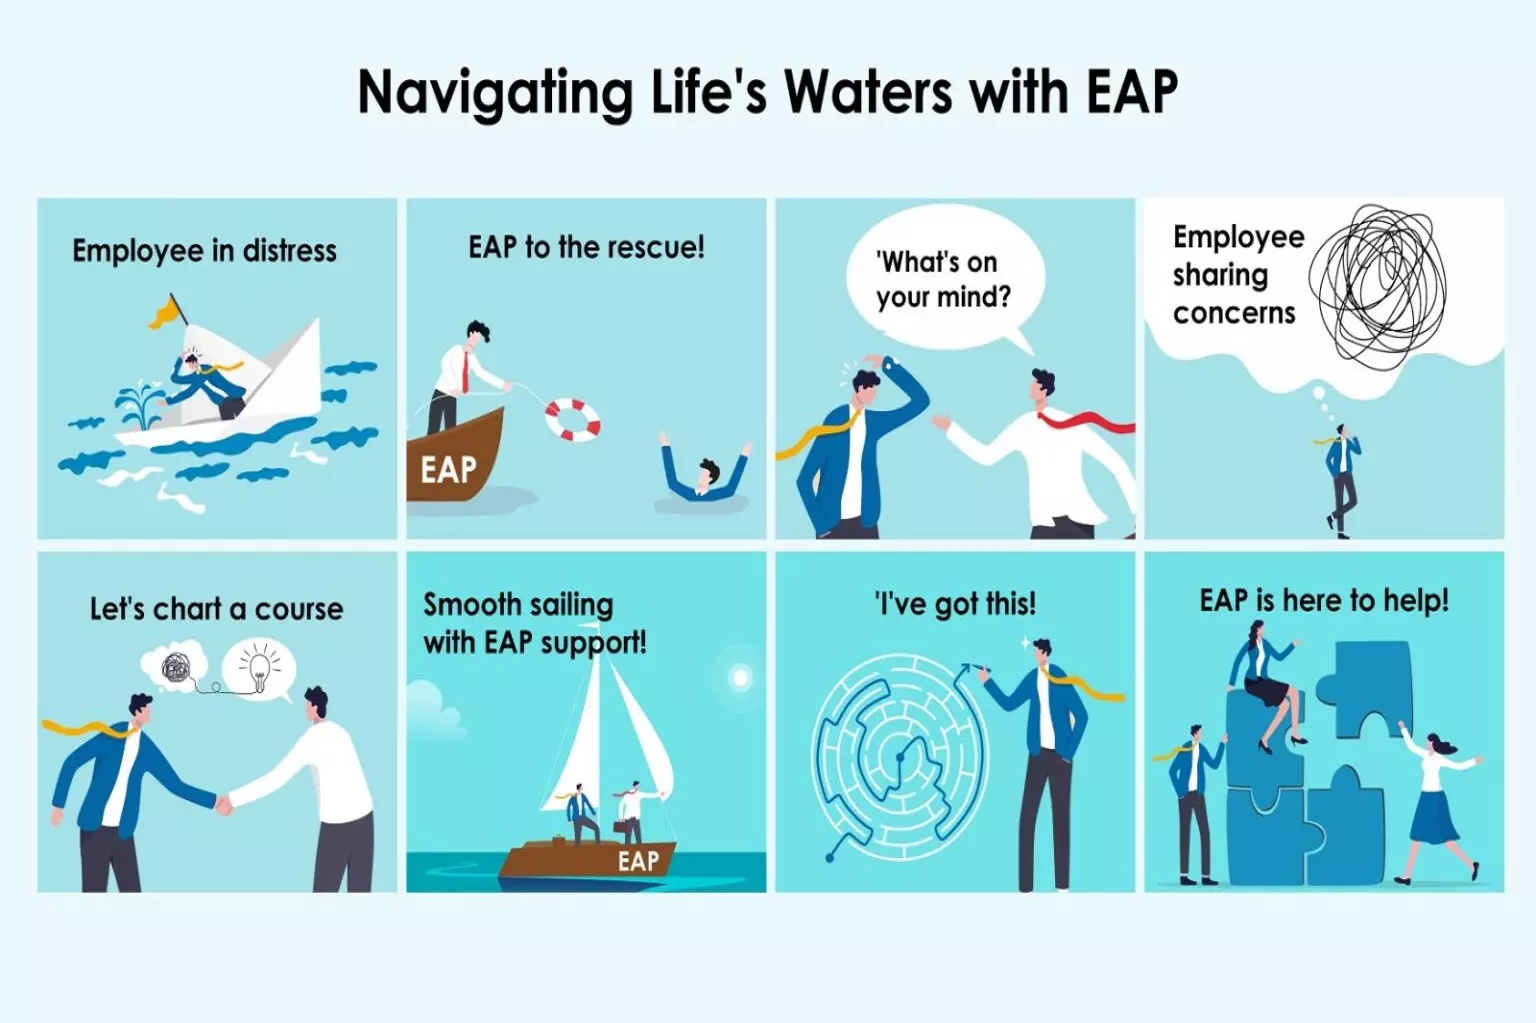 Navigating Life’s Waters with EAP: What Can You Share?